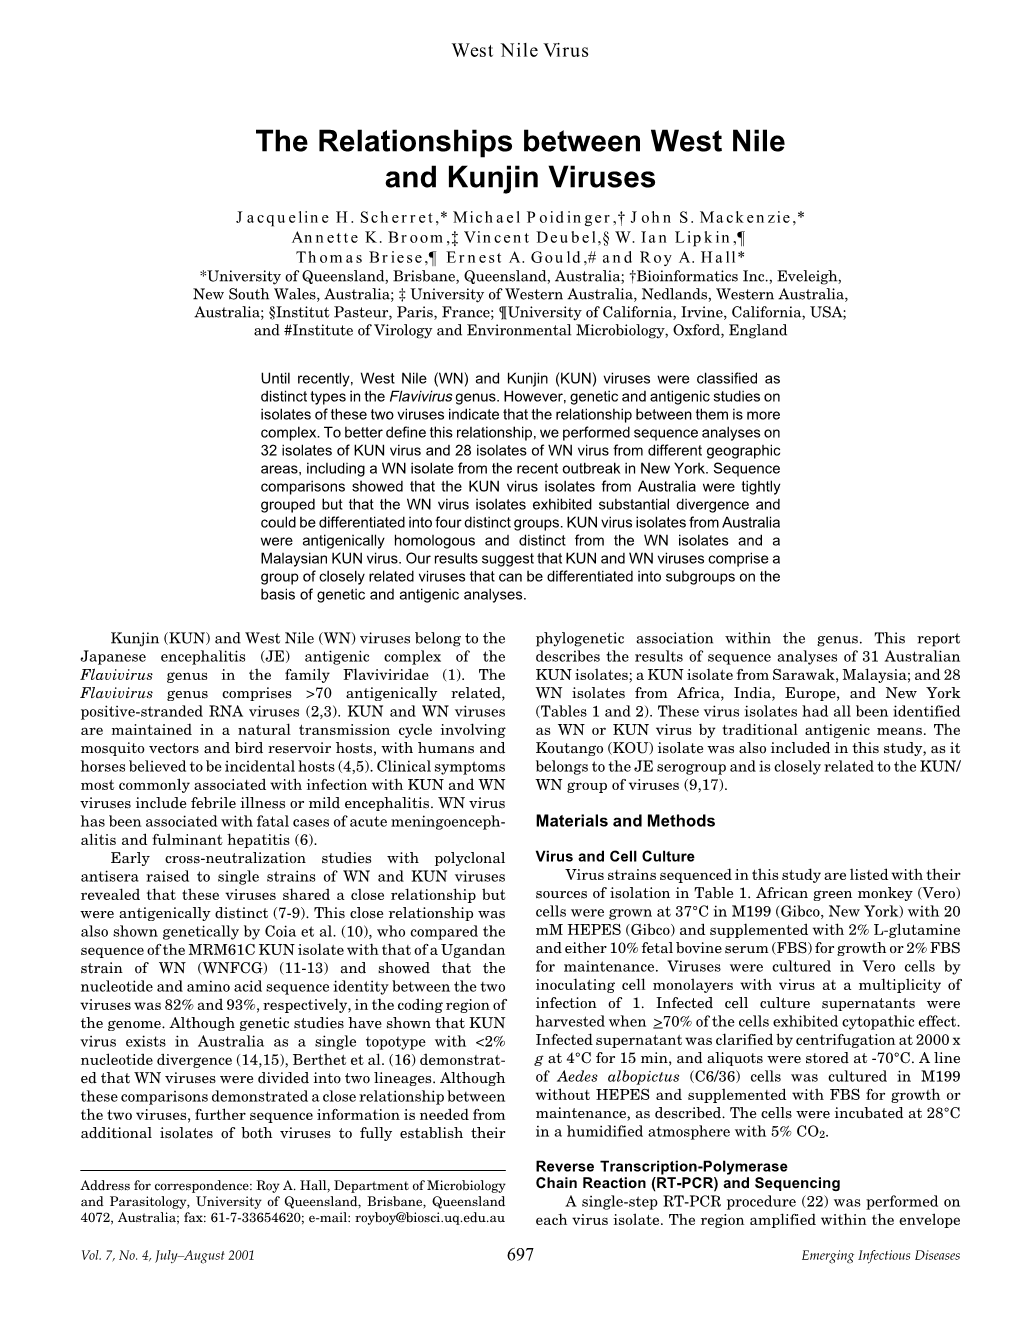 The Relationships Between West Nile and Kunjin Viruses Jacqueline H